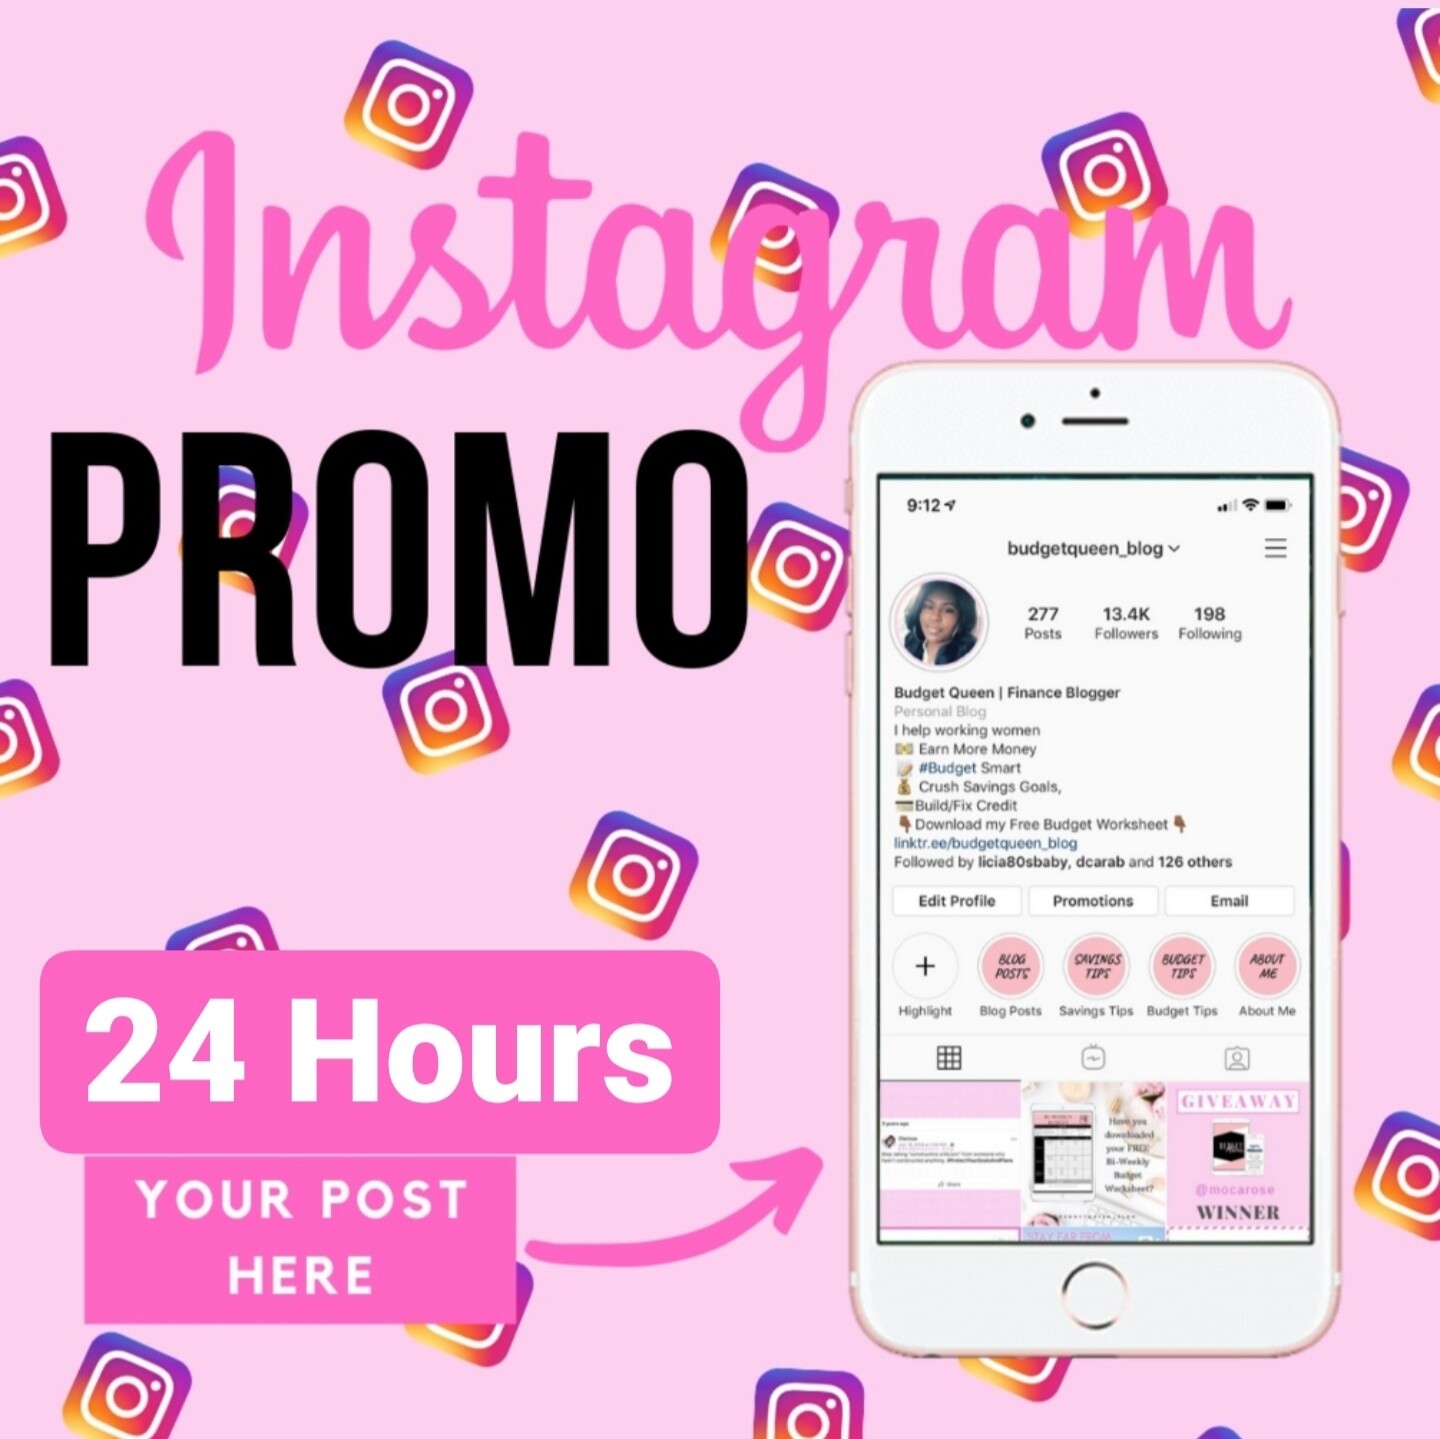 Instagram Page Promo